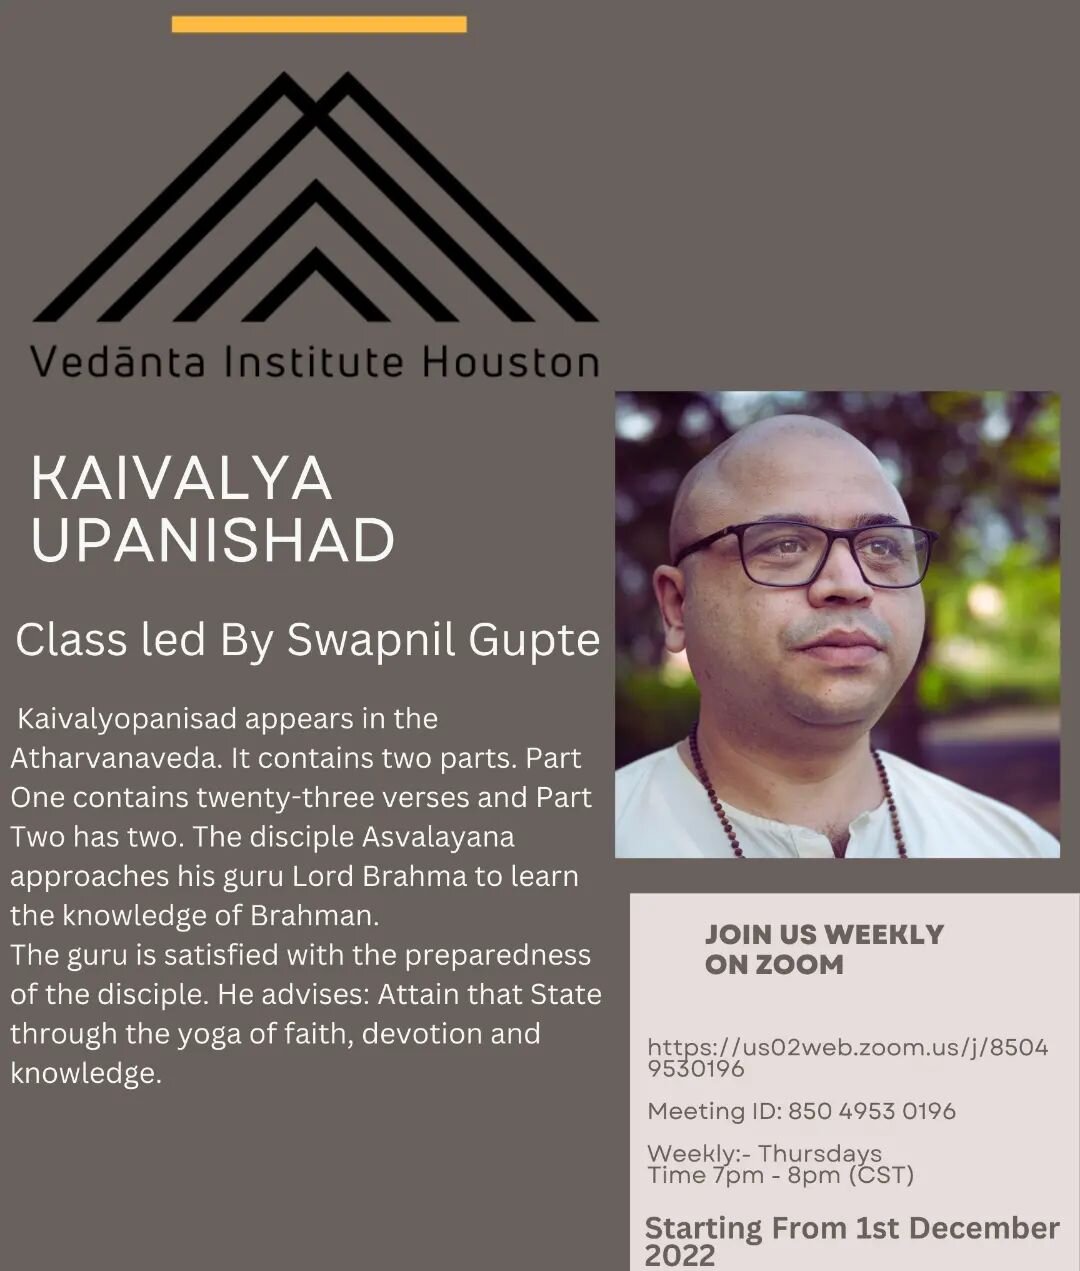 Join Swapnilji in exploring this ancient, profound text. 

DM us with any questions.

All are welcome.